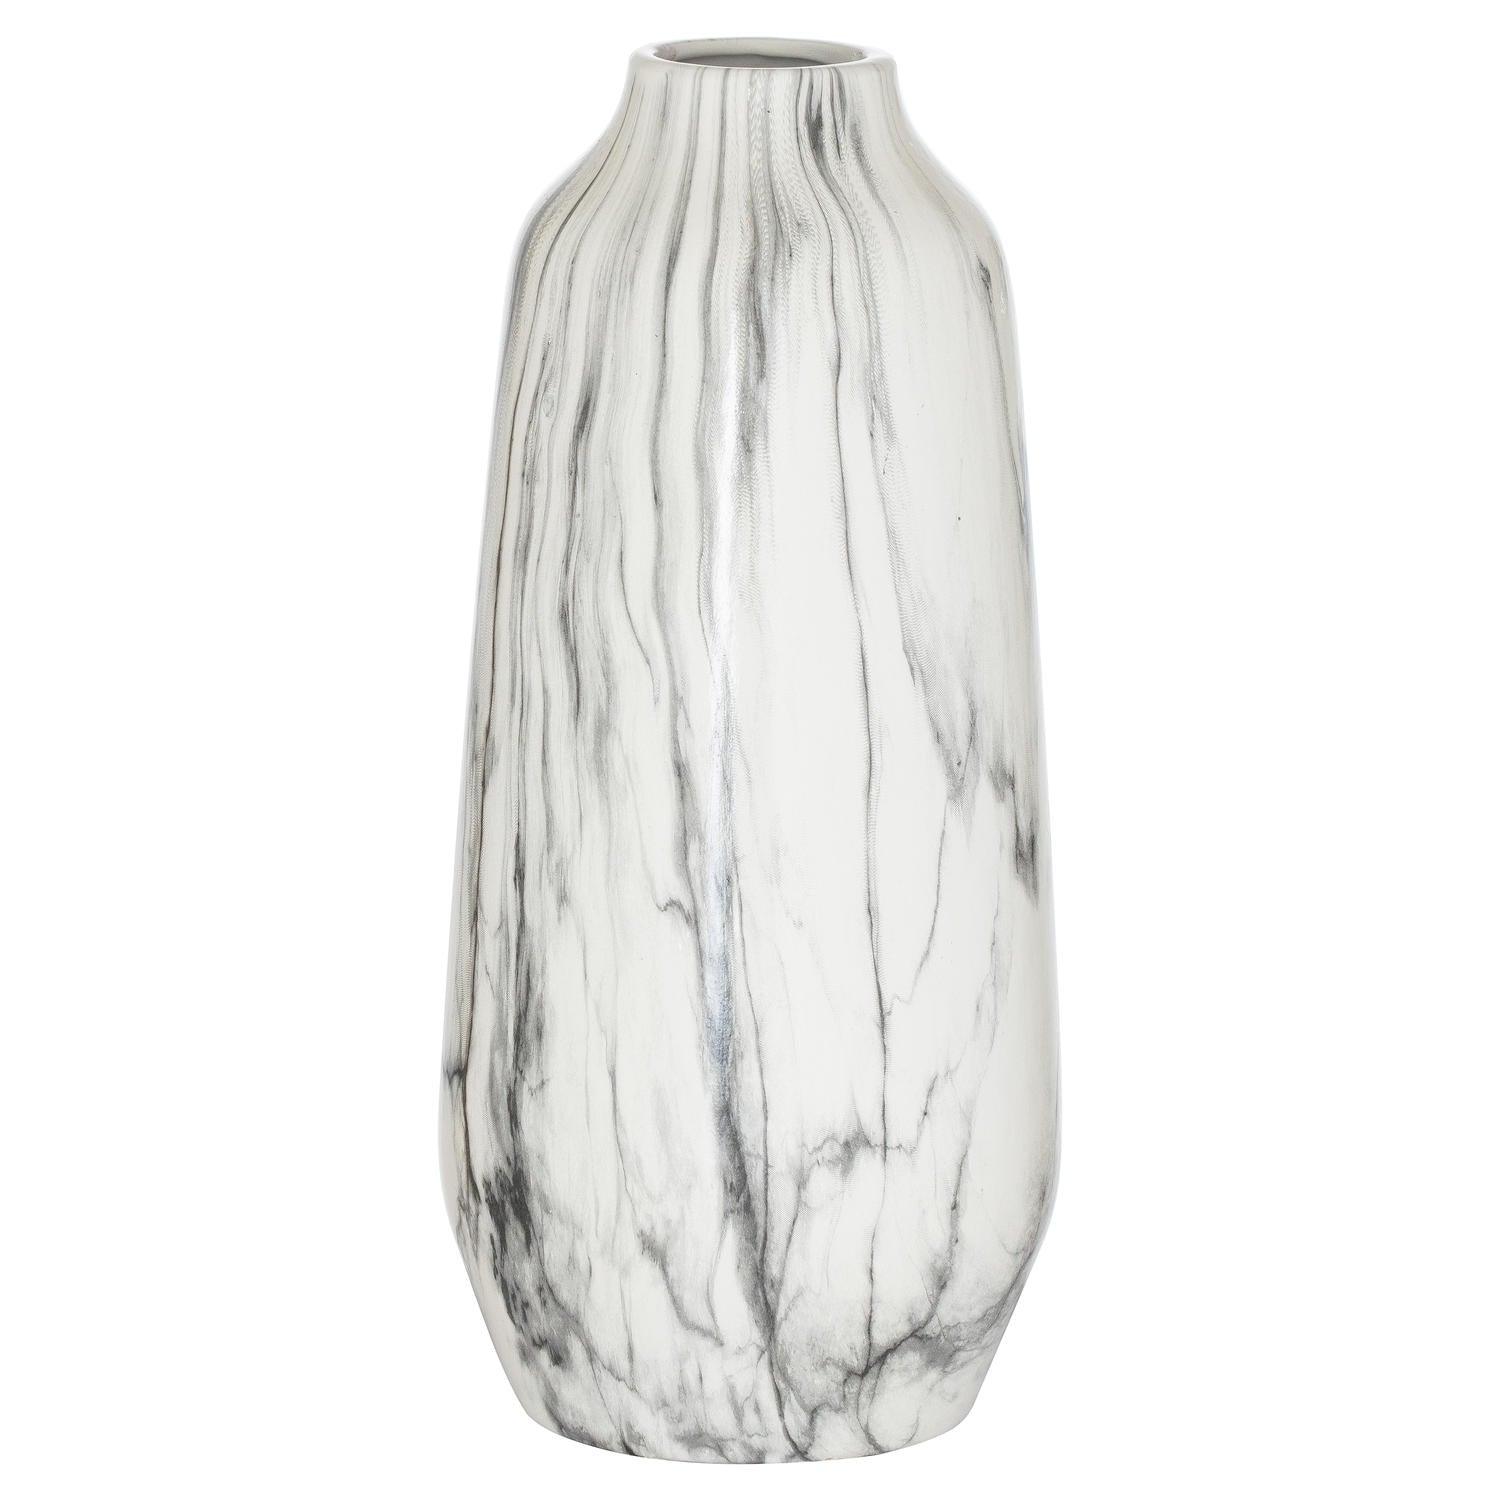 View Marble Olpe Tall Vase information